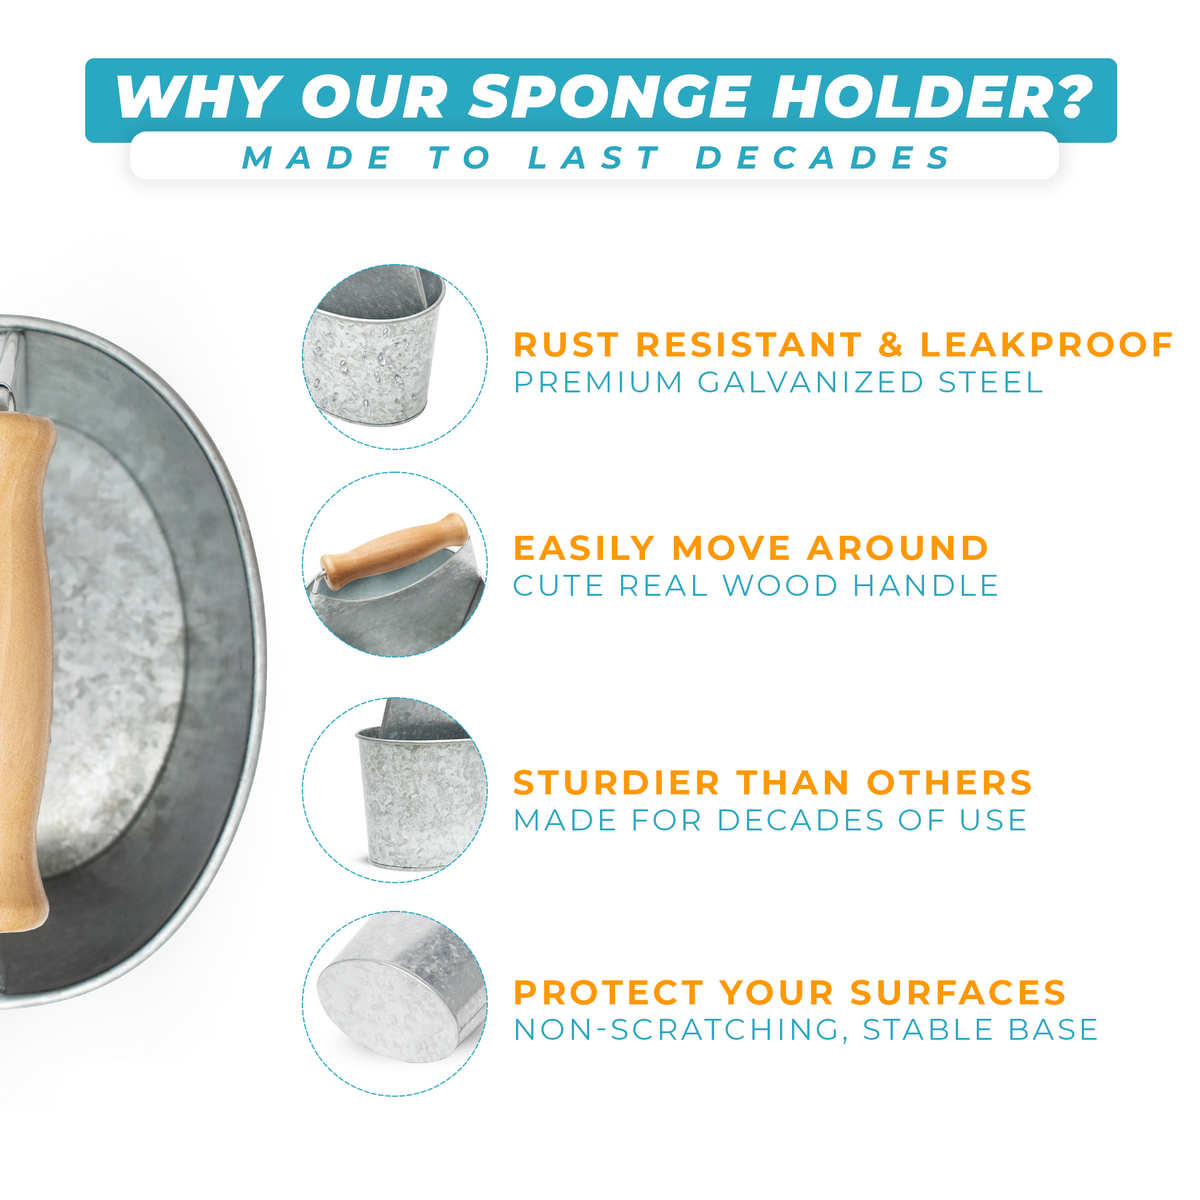 Sturdy sponge holder with features made to last decades